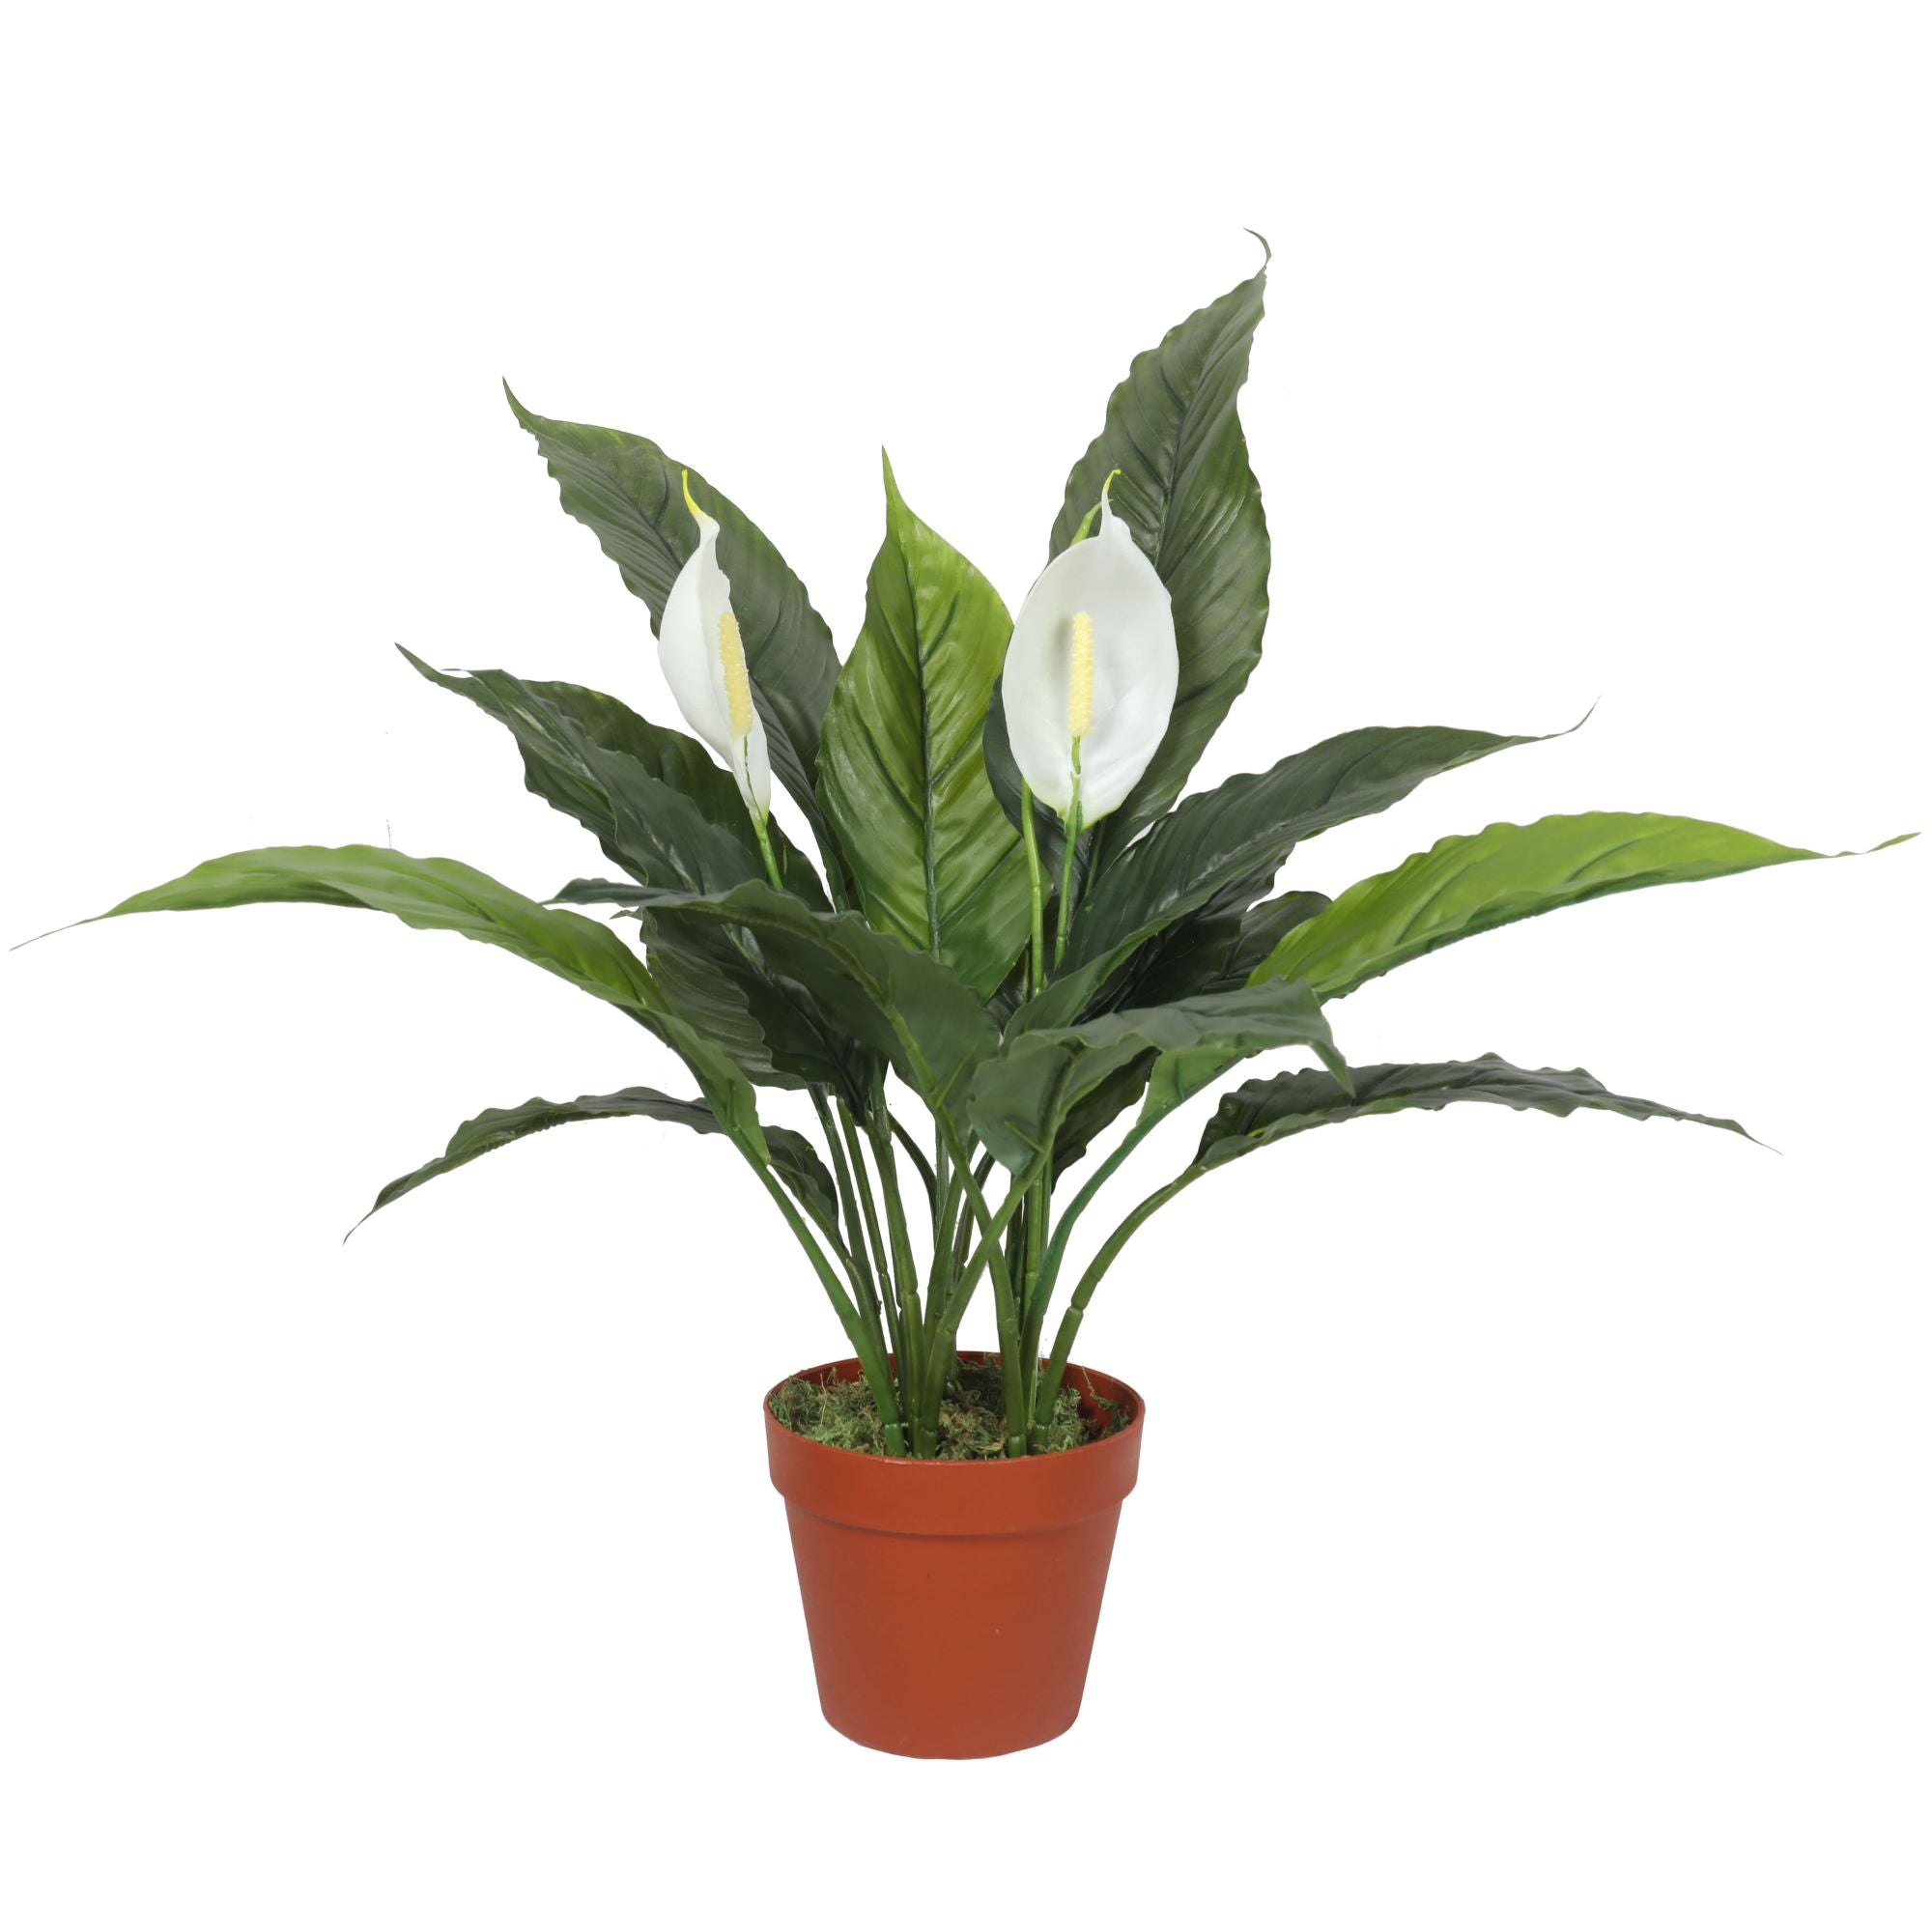 artificial-spathiphyllum-peace-lily-plant-with-white-flowers-60cm-471199.jpg